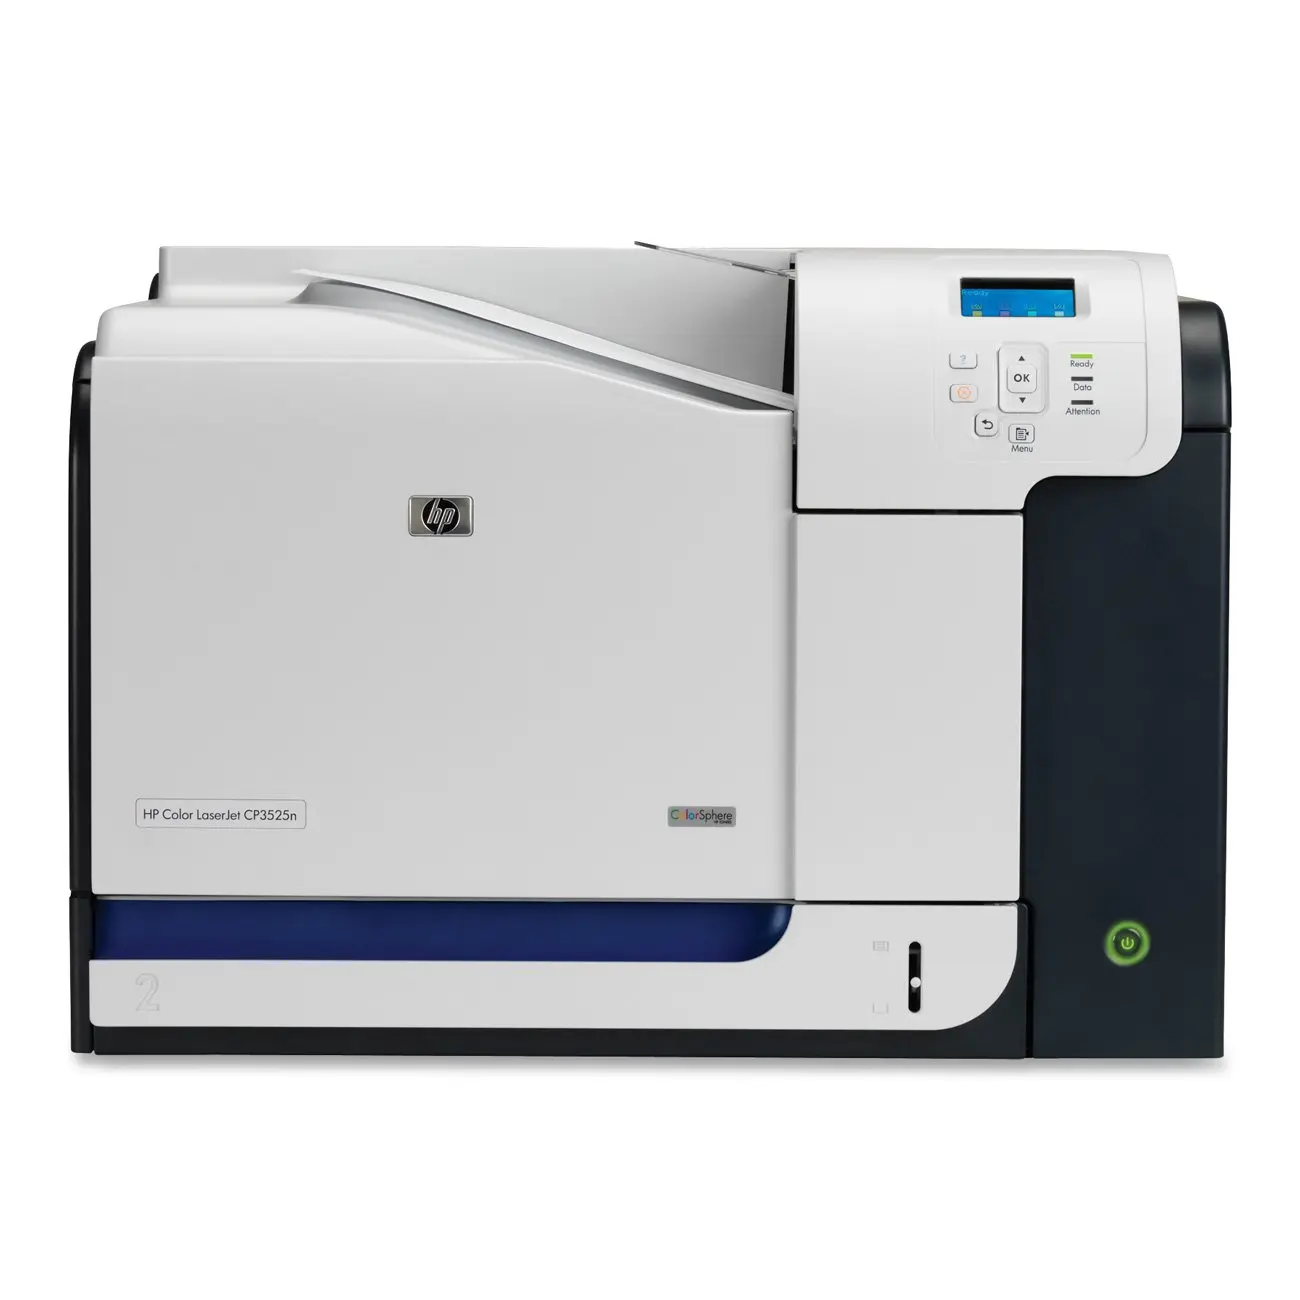 Hp cp3525n color laser printer - reliable and efficient